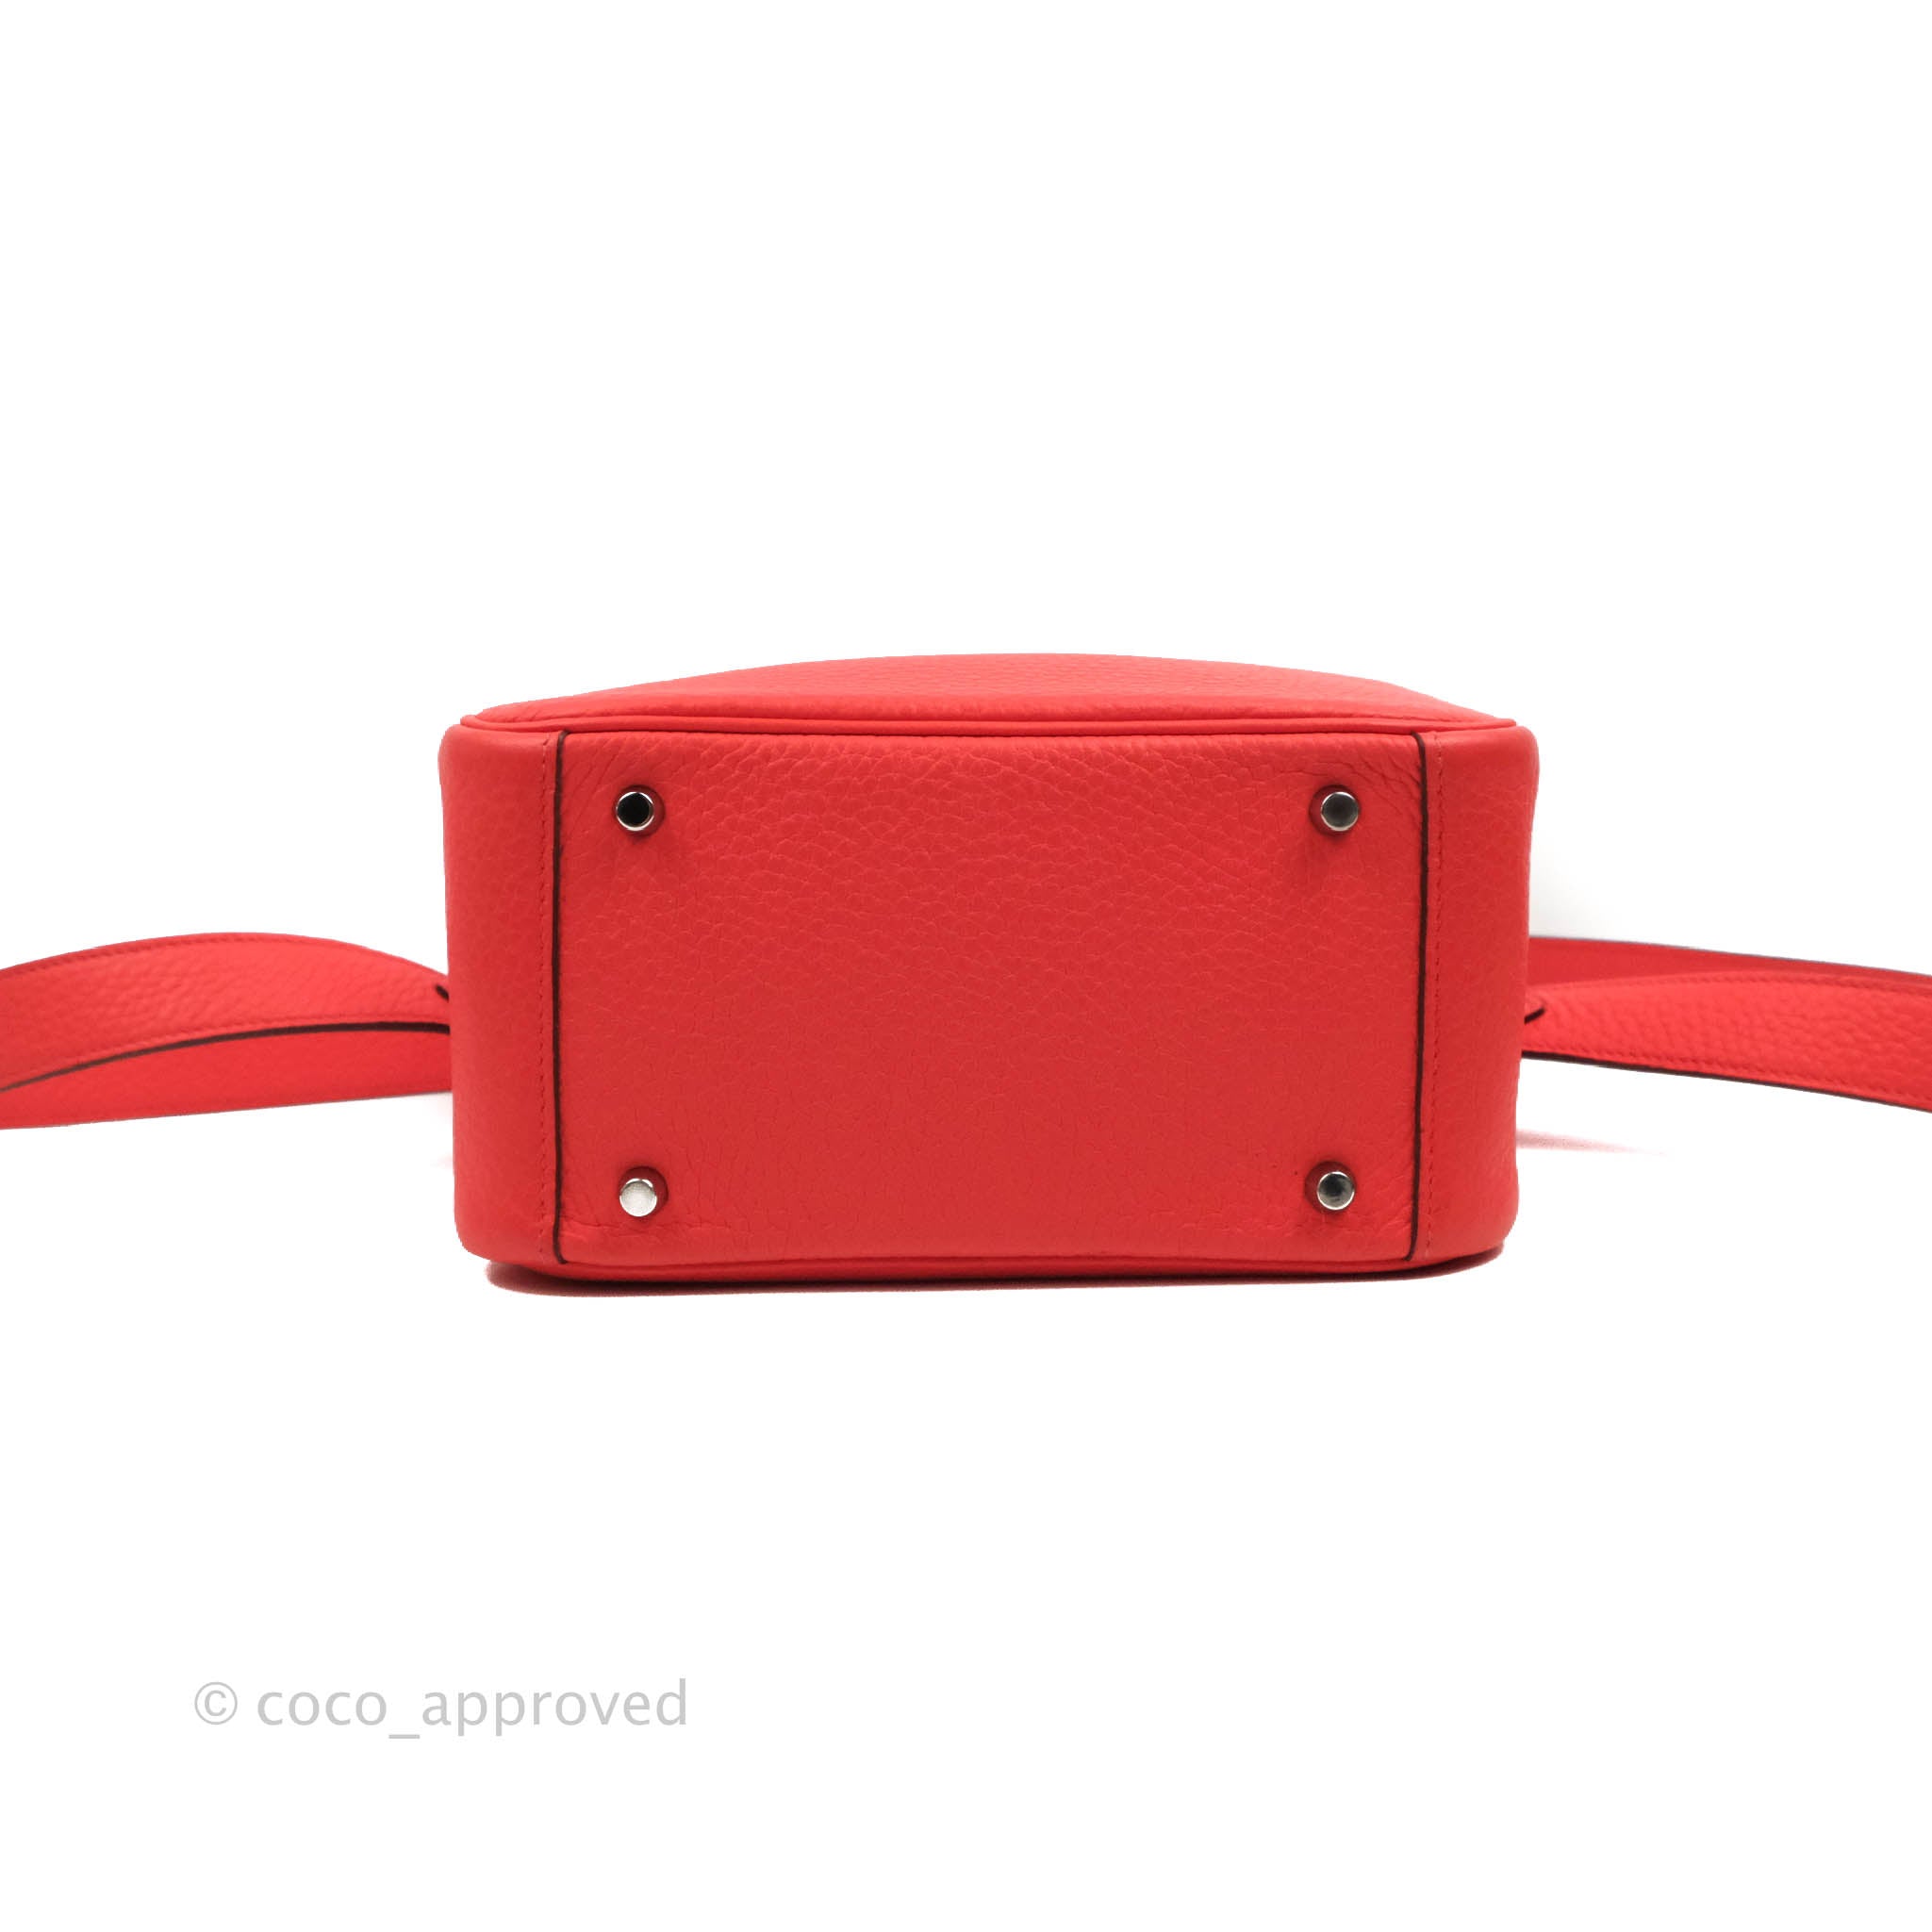 Hermès Rouge Tomate Clemence Mini Lindy 20 Gold Hardware, 2021 Available  For Immediate Sale At Sotheby's